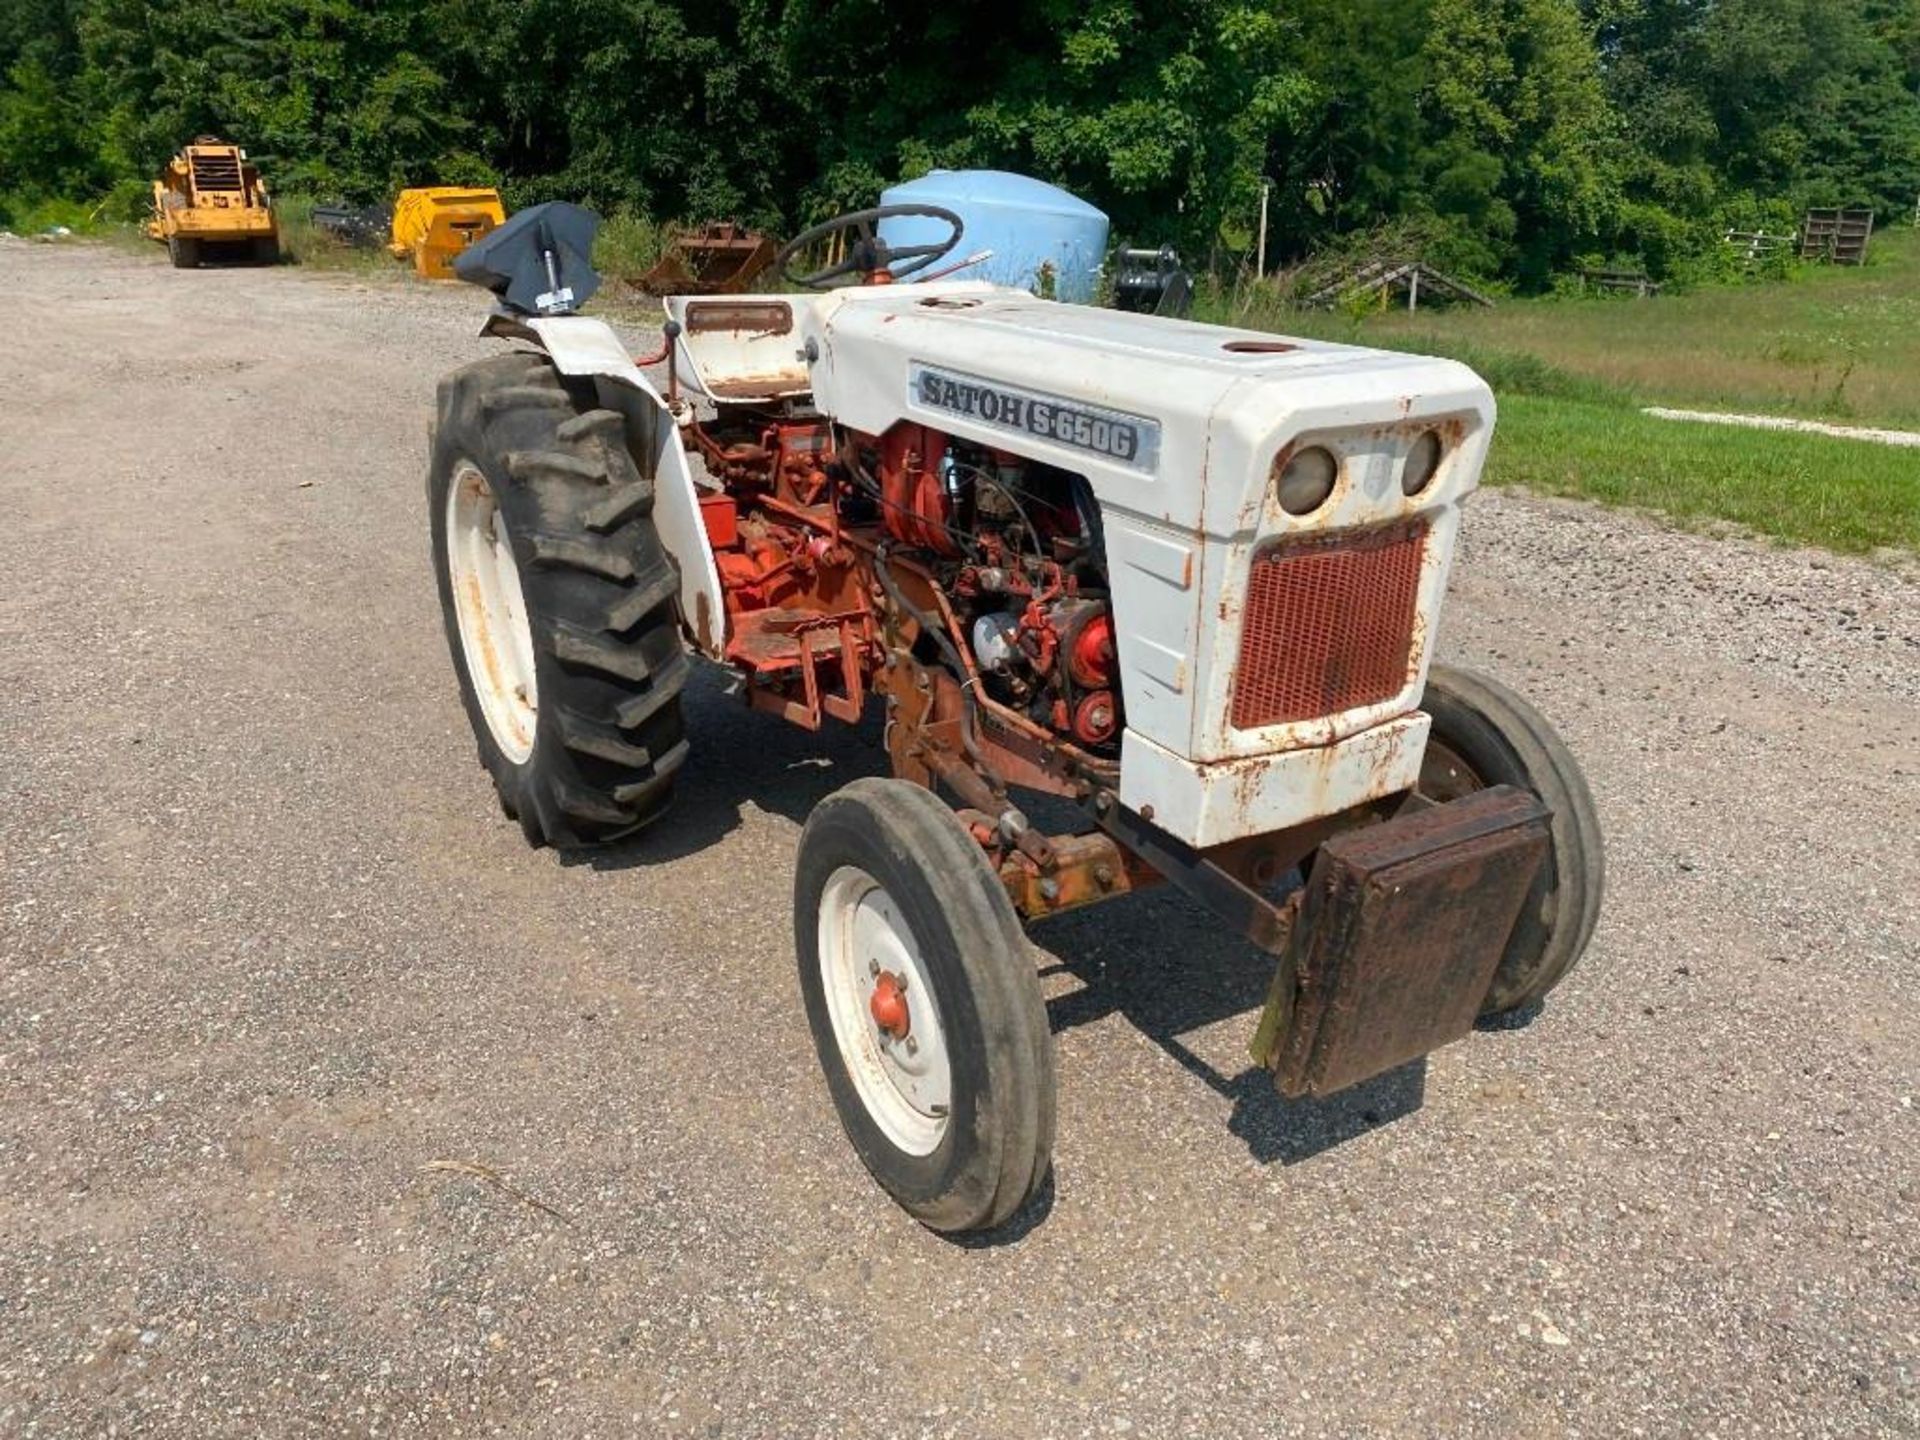 1978 Satoh S-650G Tractor - Image 4 of 26